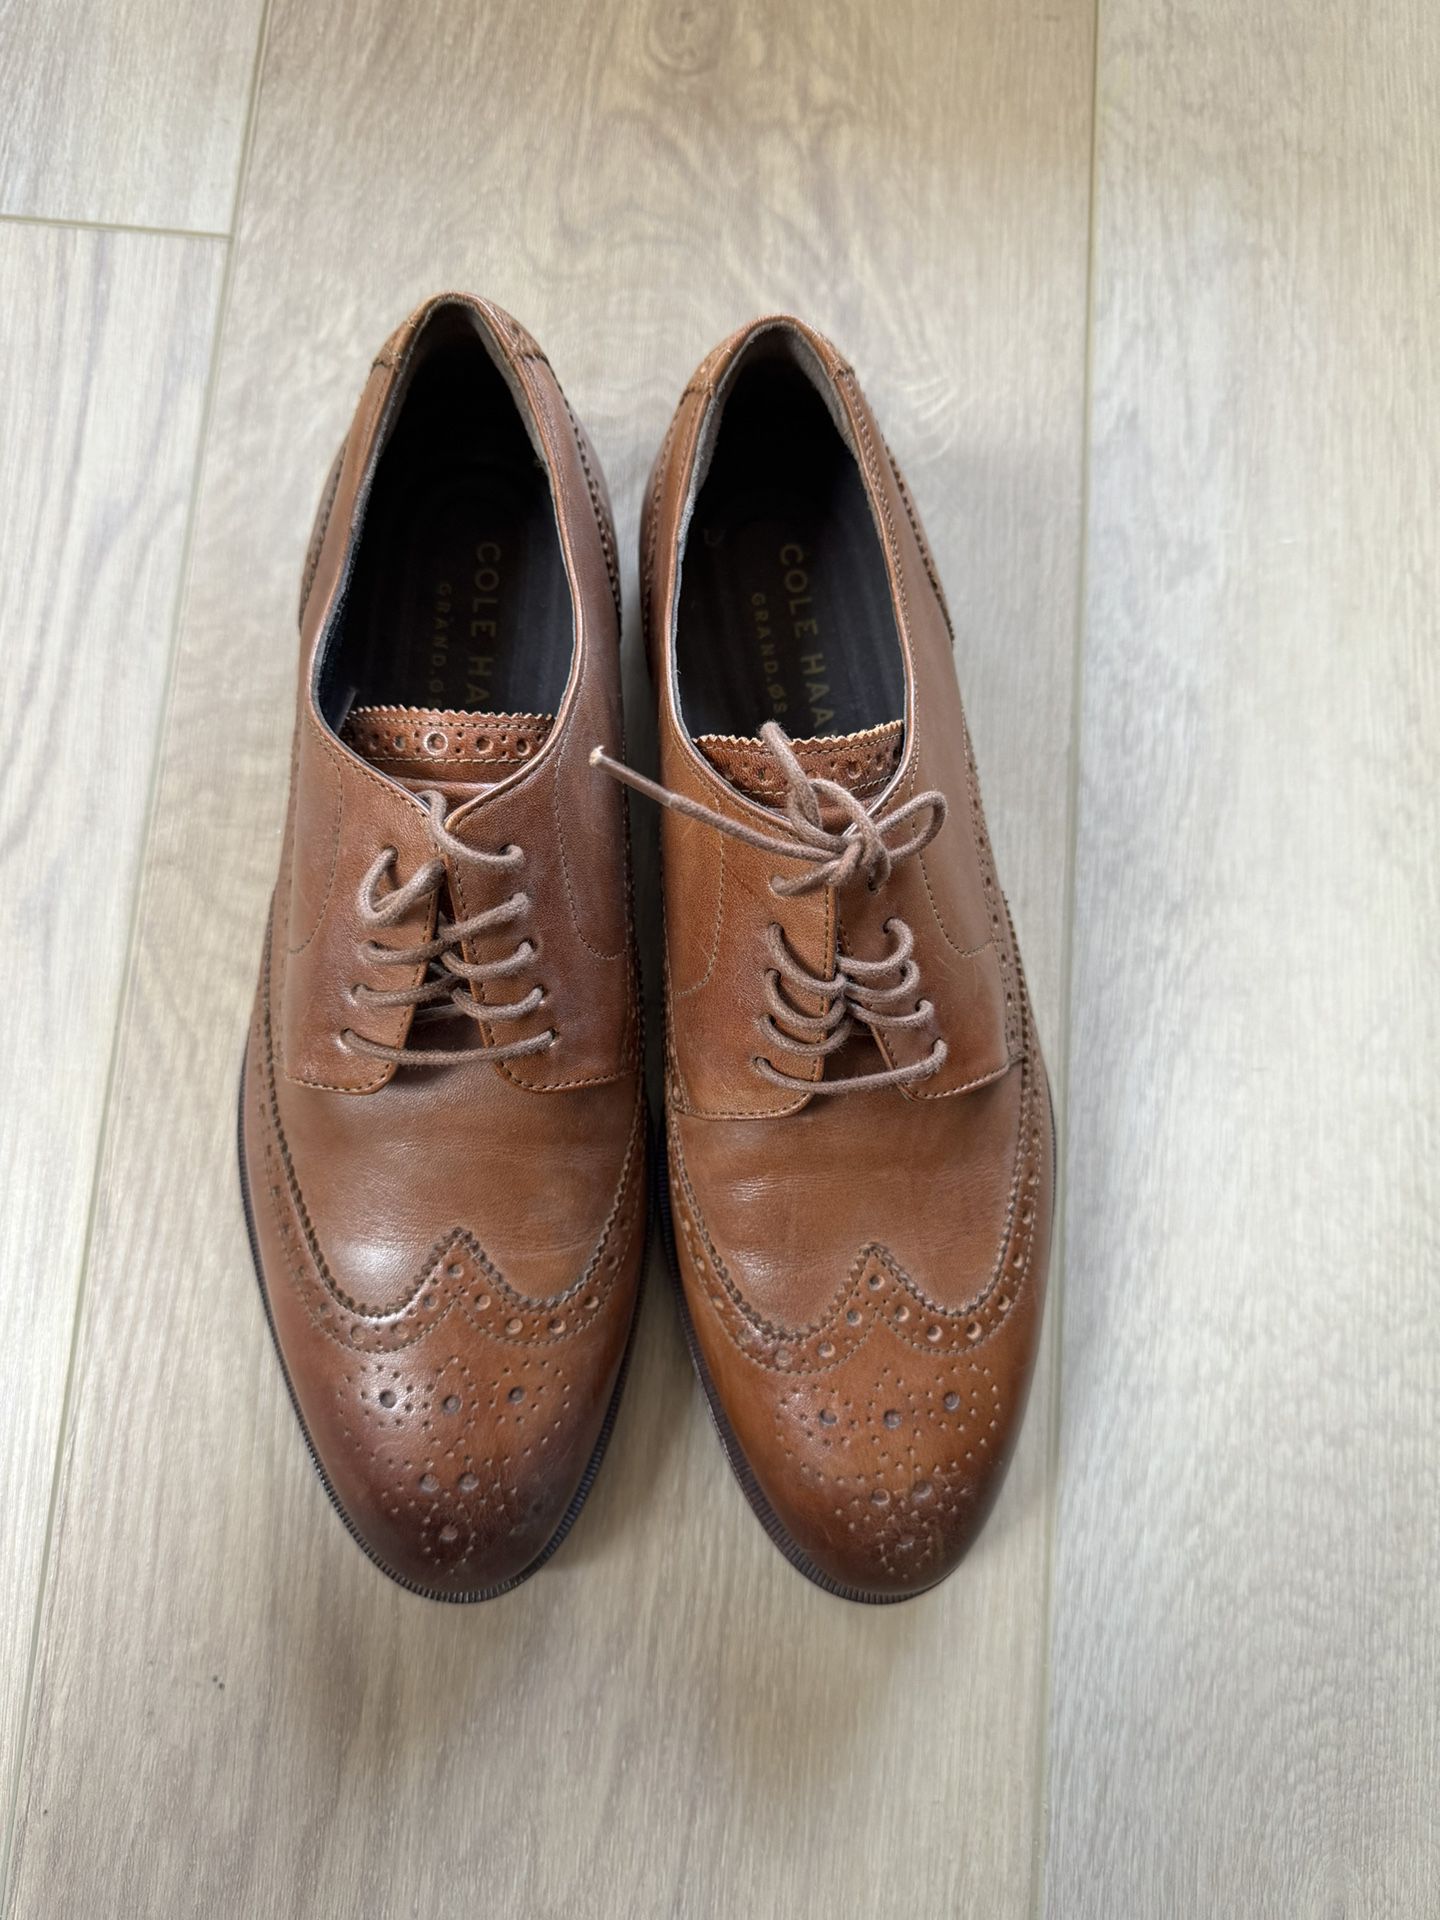 Cole Haan Leather Shoes Size 8W Dress Or Casual Shoes 